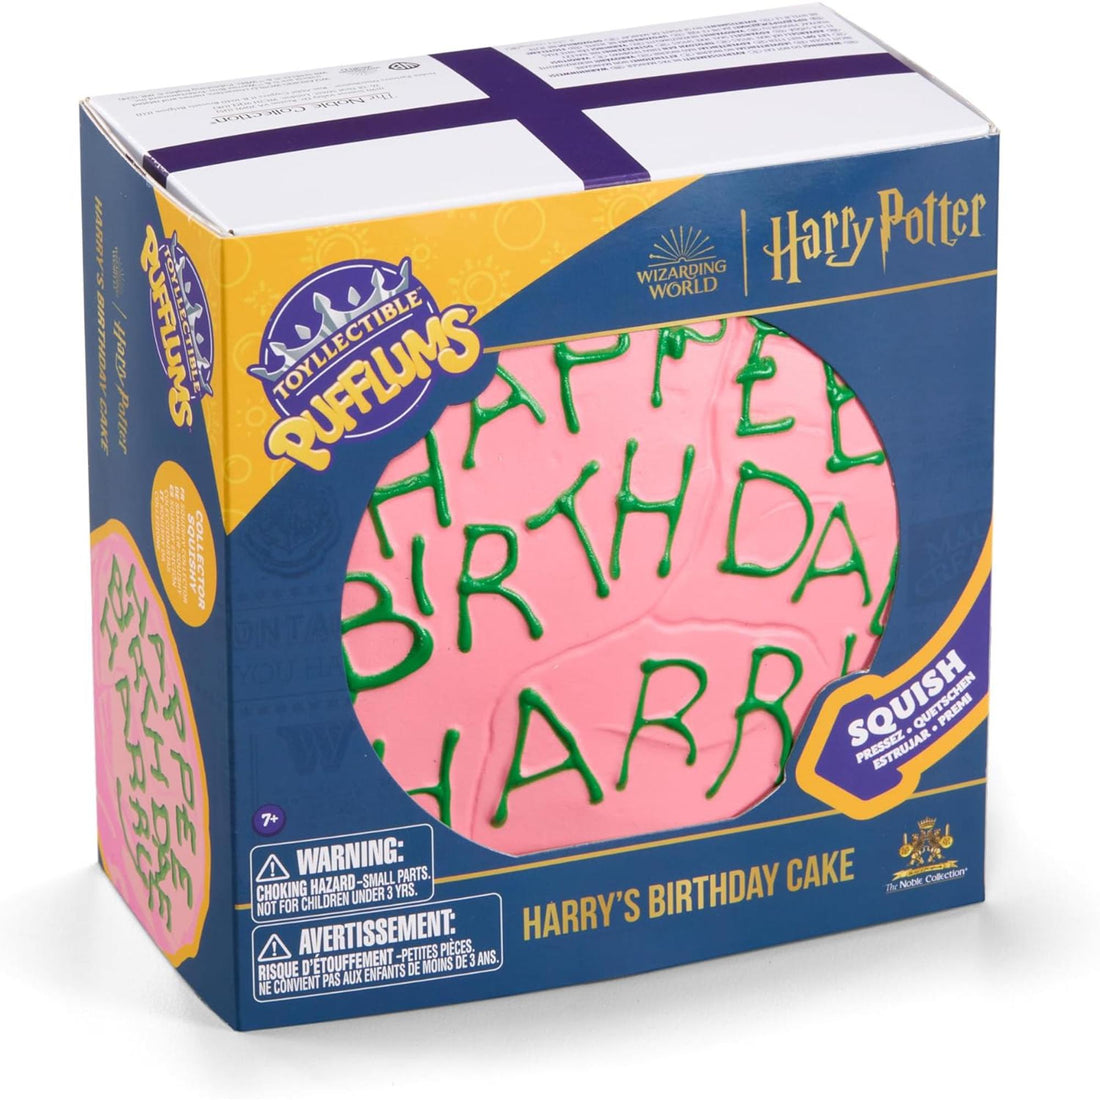 Harry&#39s Birthday Cake - Toyllectible Pufflums? - Harry Potter